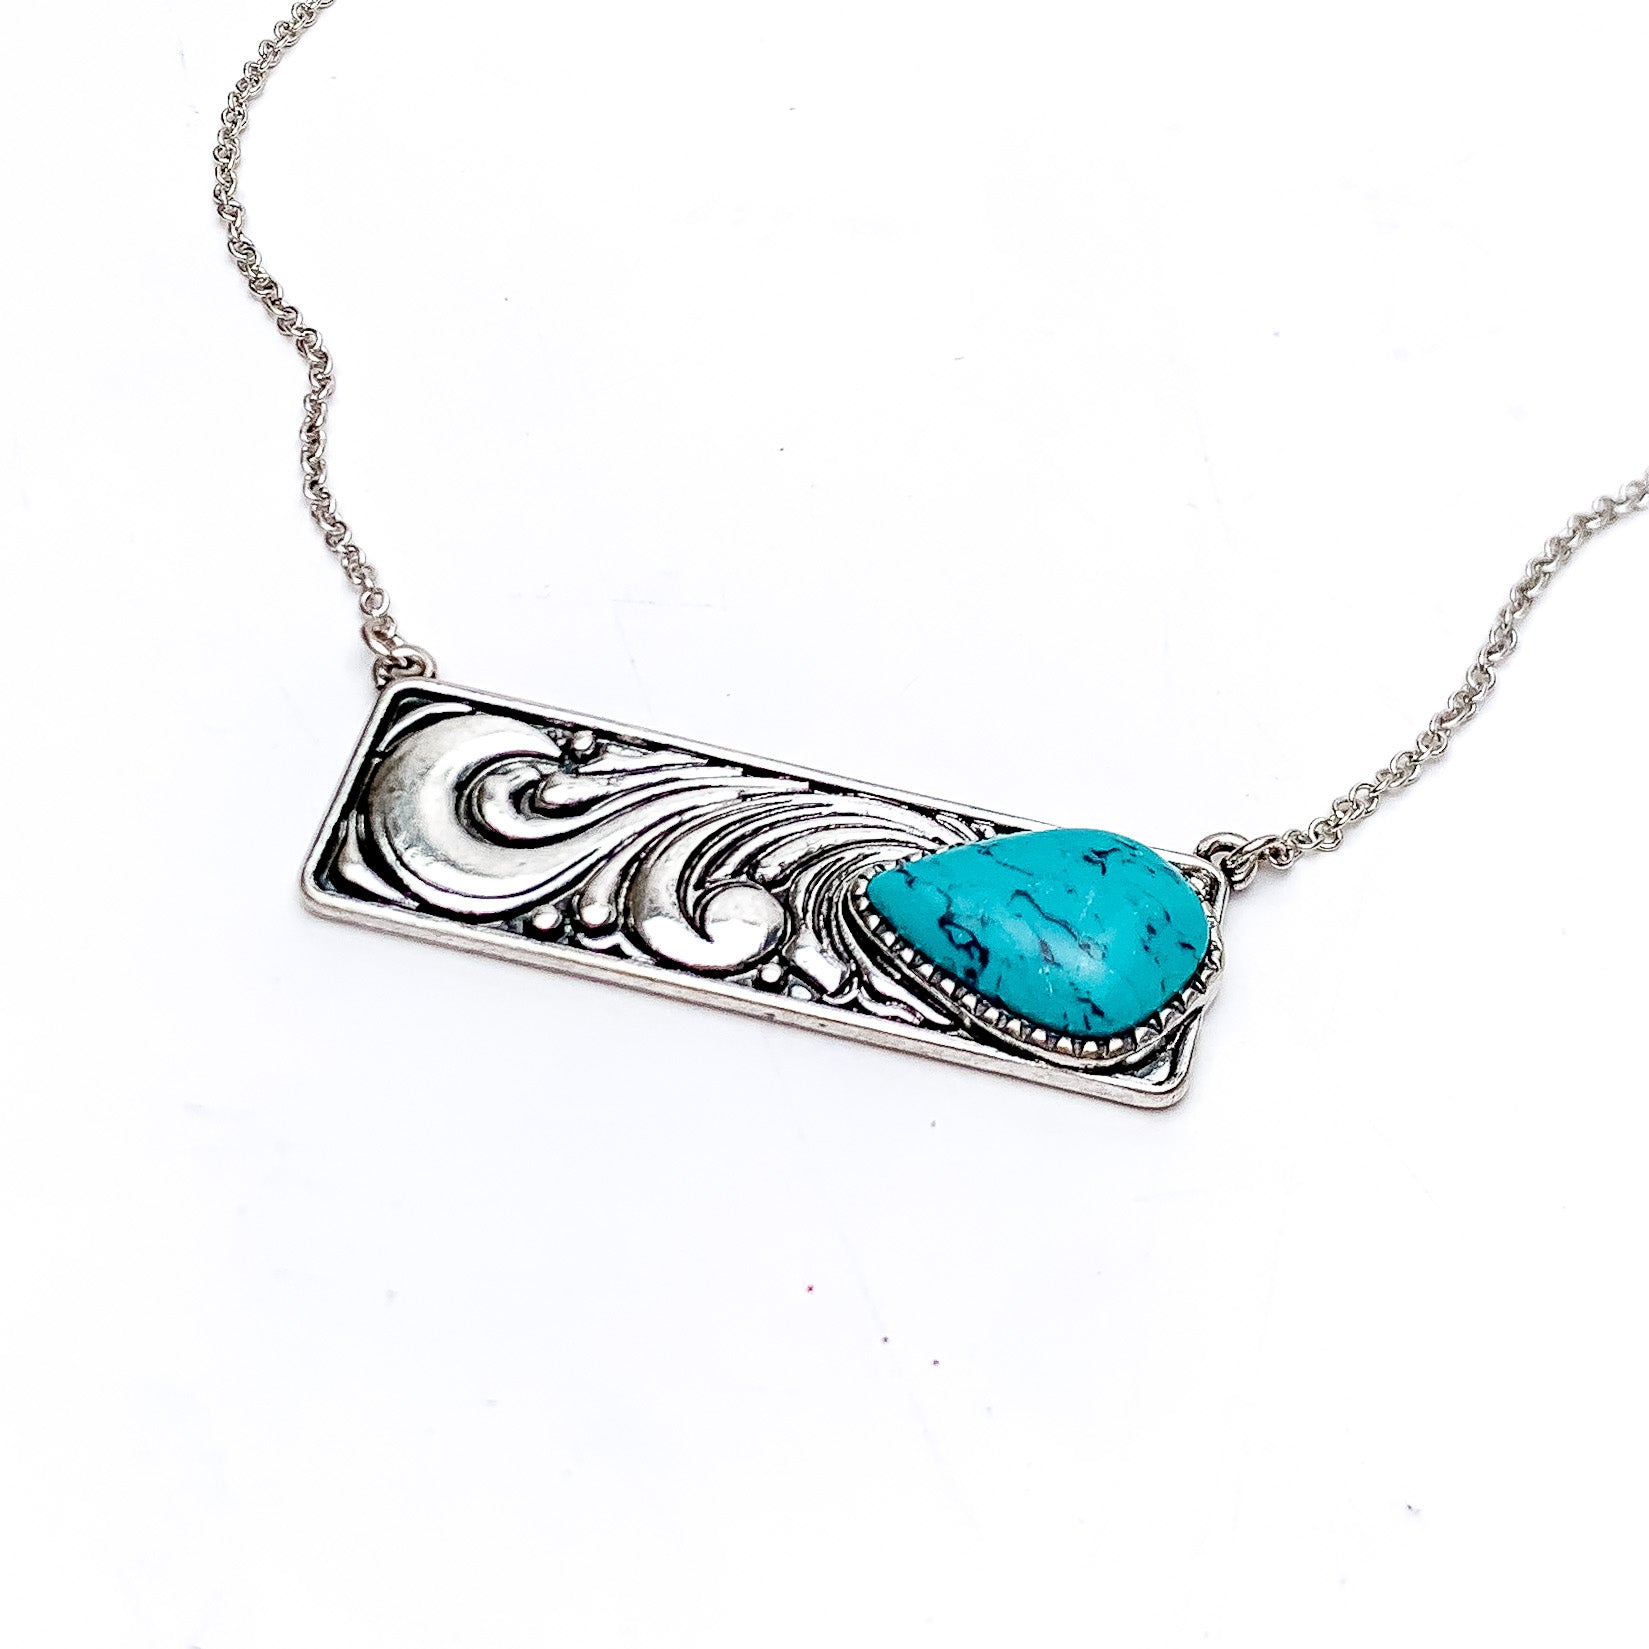 Western Swirl Silver Tone Necklace With Bar Pendent and Turquoise Stone - Giddy Up Glamour Boutique